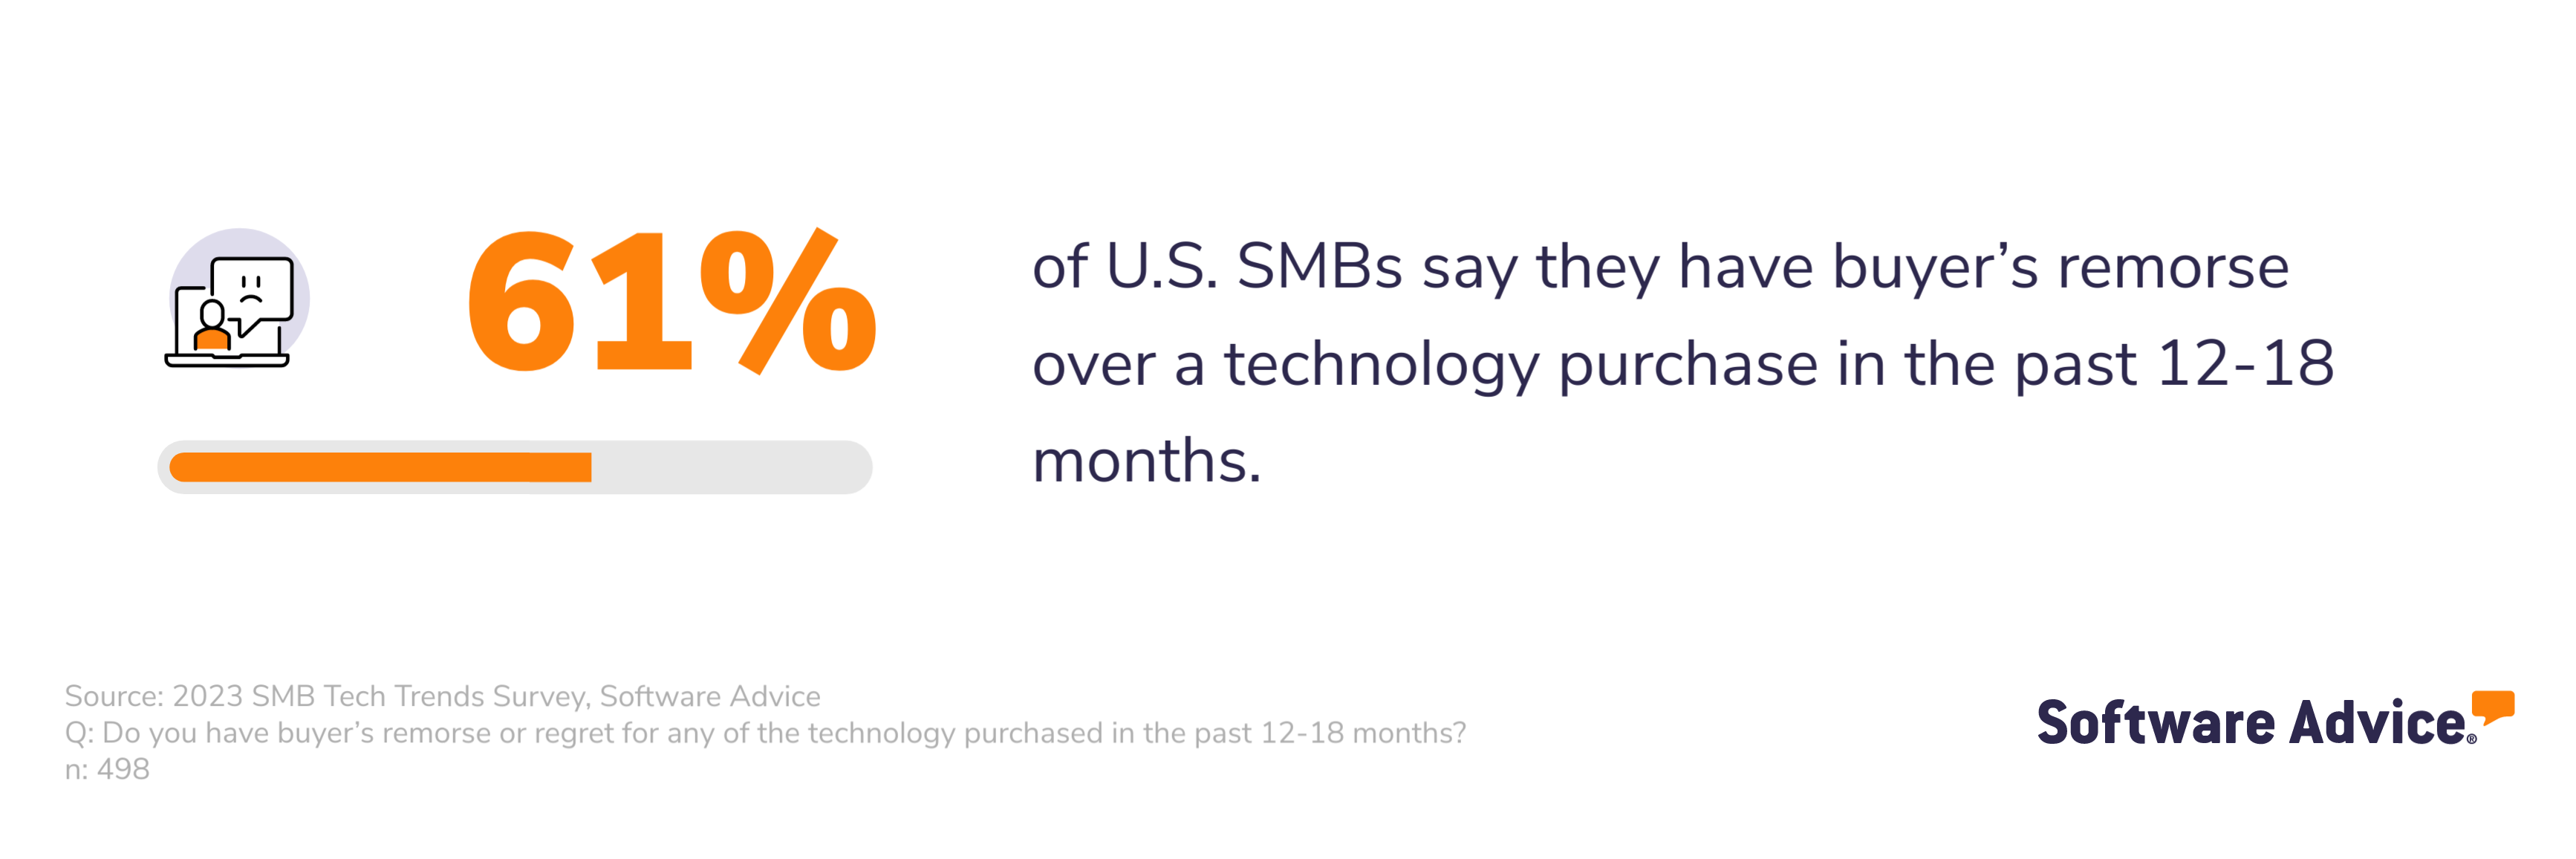 A graphic showing that 61% of U.S. SMBs regret a technology purchase in the past 12-18 months